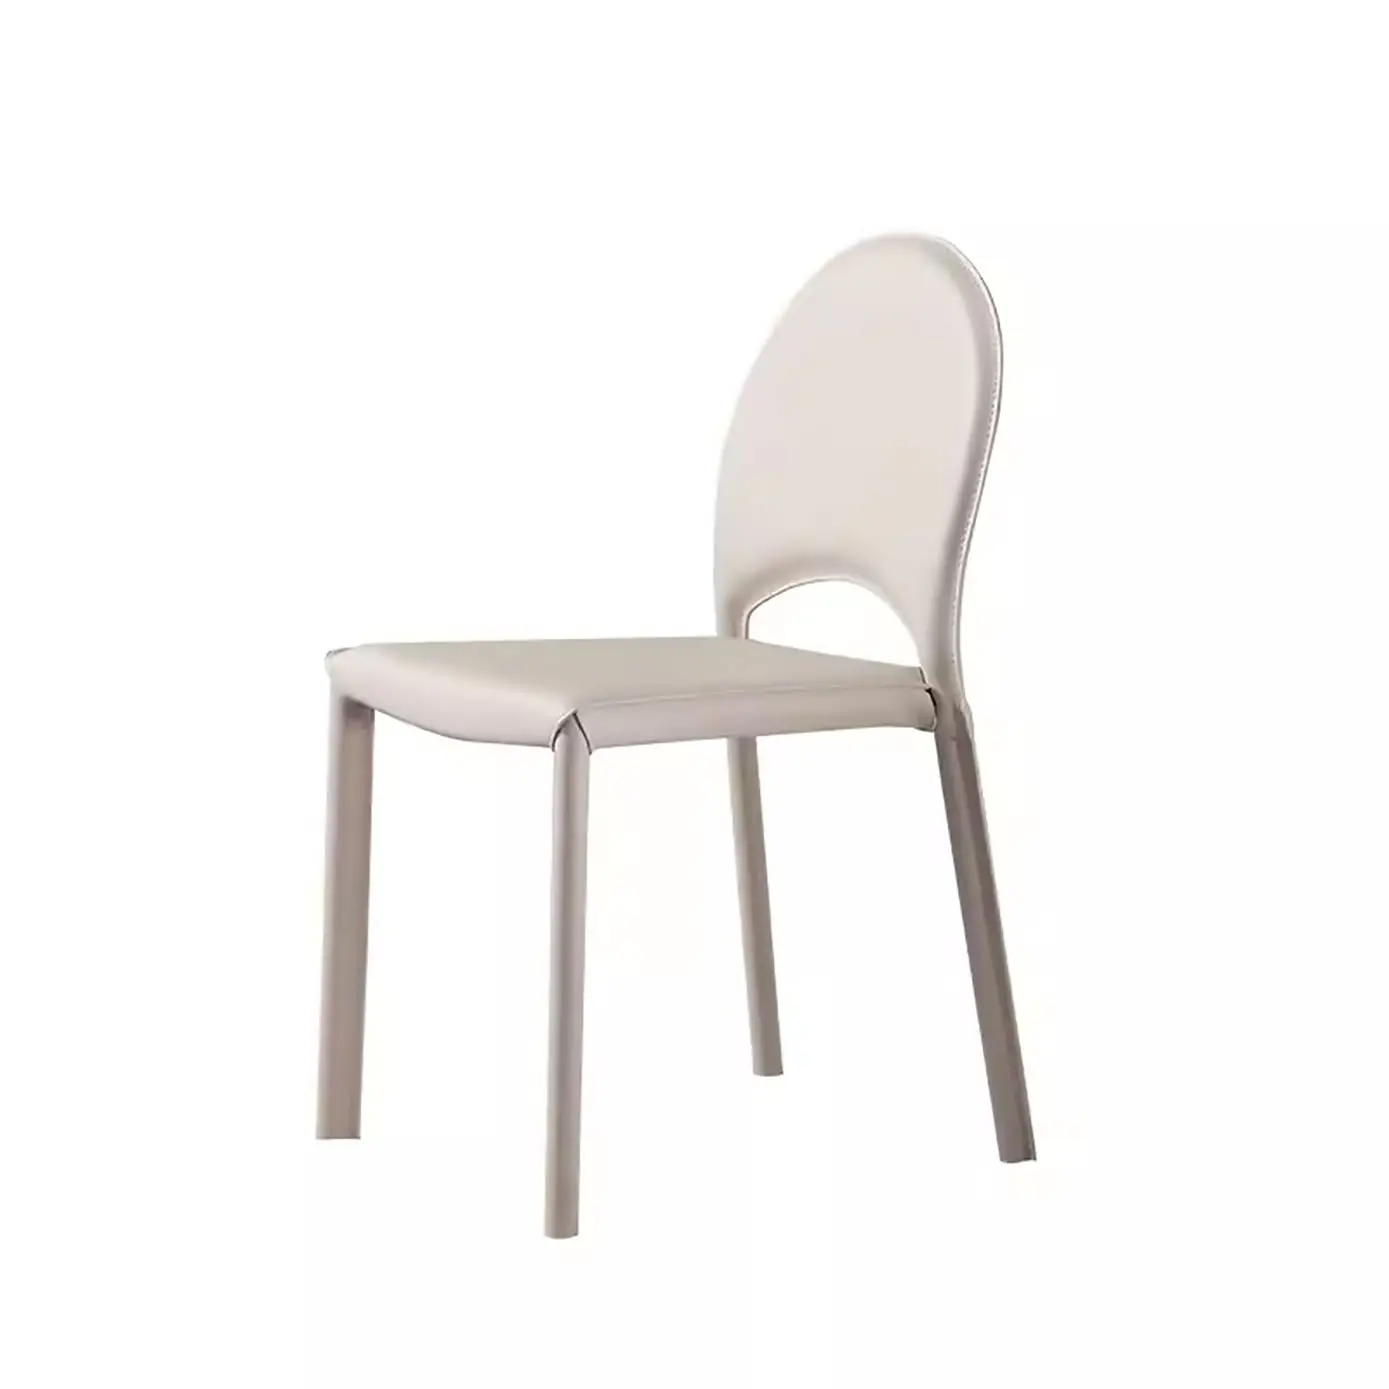 French Cream Camping Chair Italian Minimalist Backrest Chair Small House Dining Table White Saddle Leather Chair